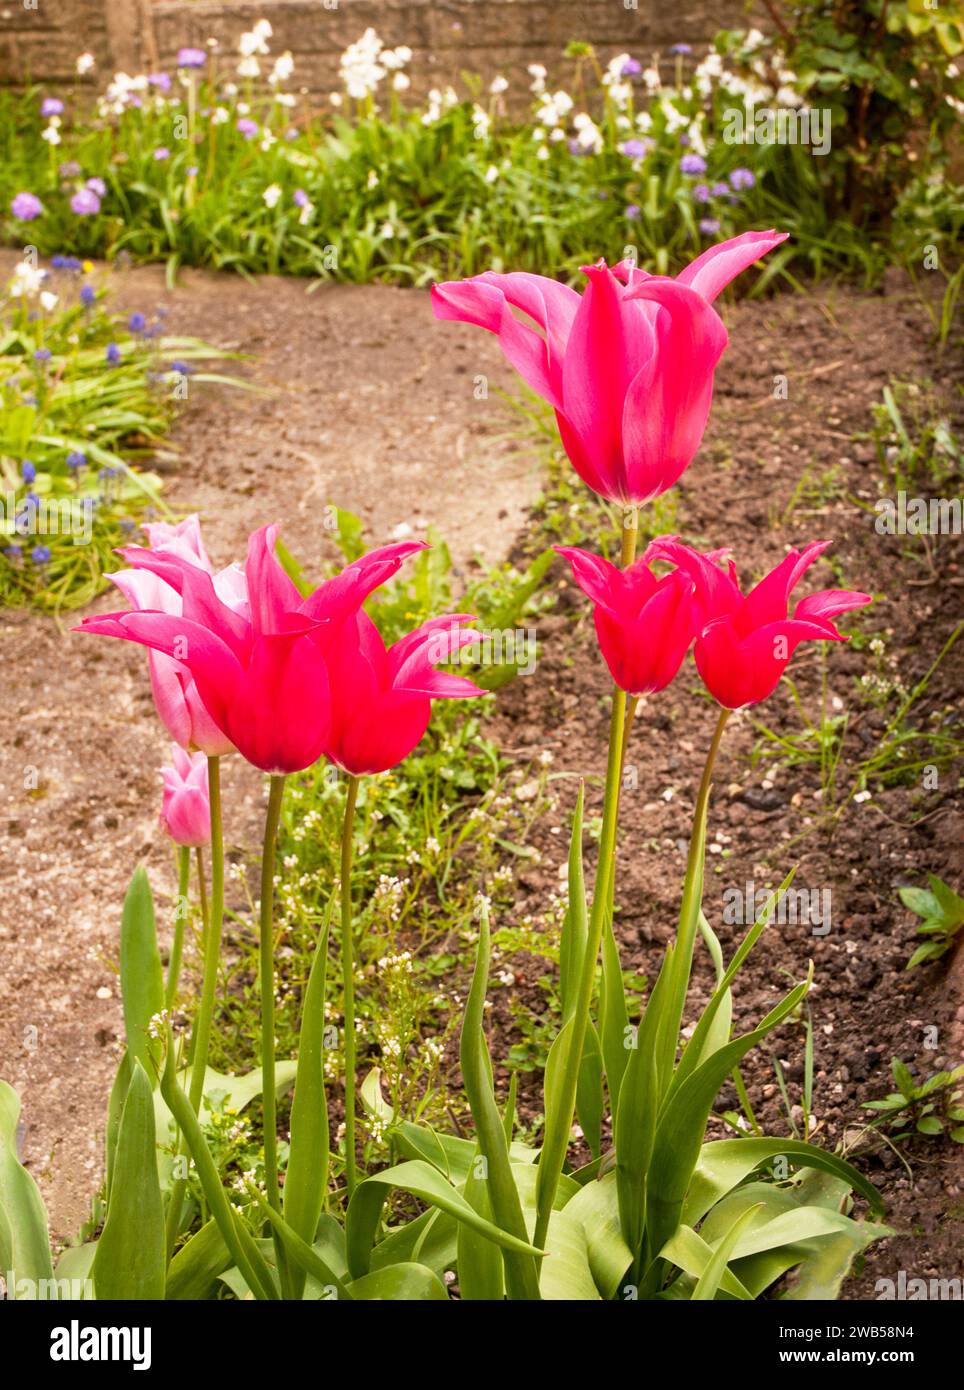 Tulipa Dolls Minuet.a Lily type late spring flowering bi coloured red and soft green tulip belonging to the viridiflora Division 8 group of tulips Stock Photo